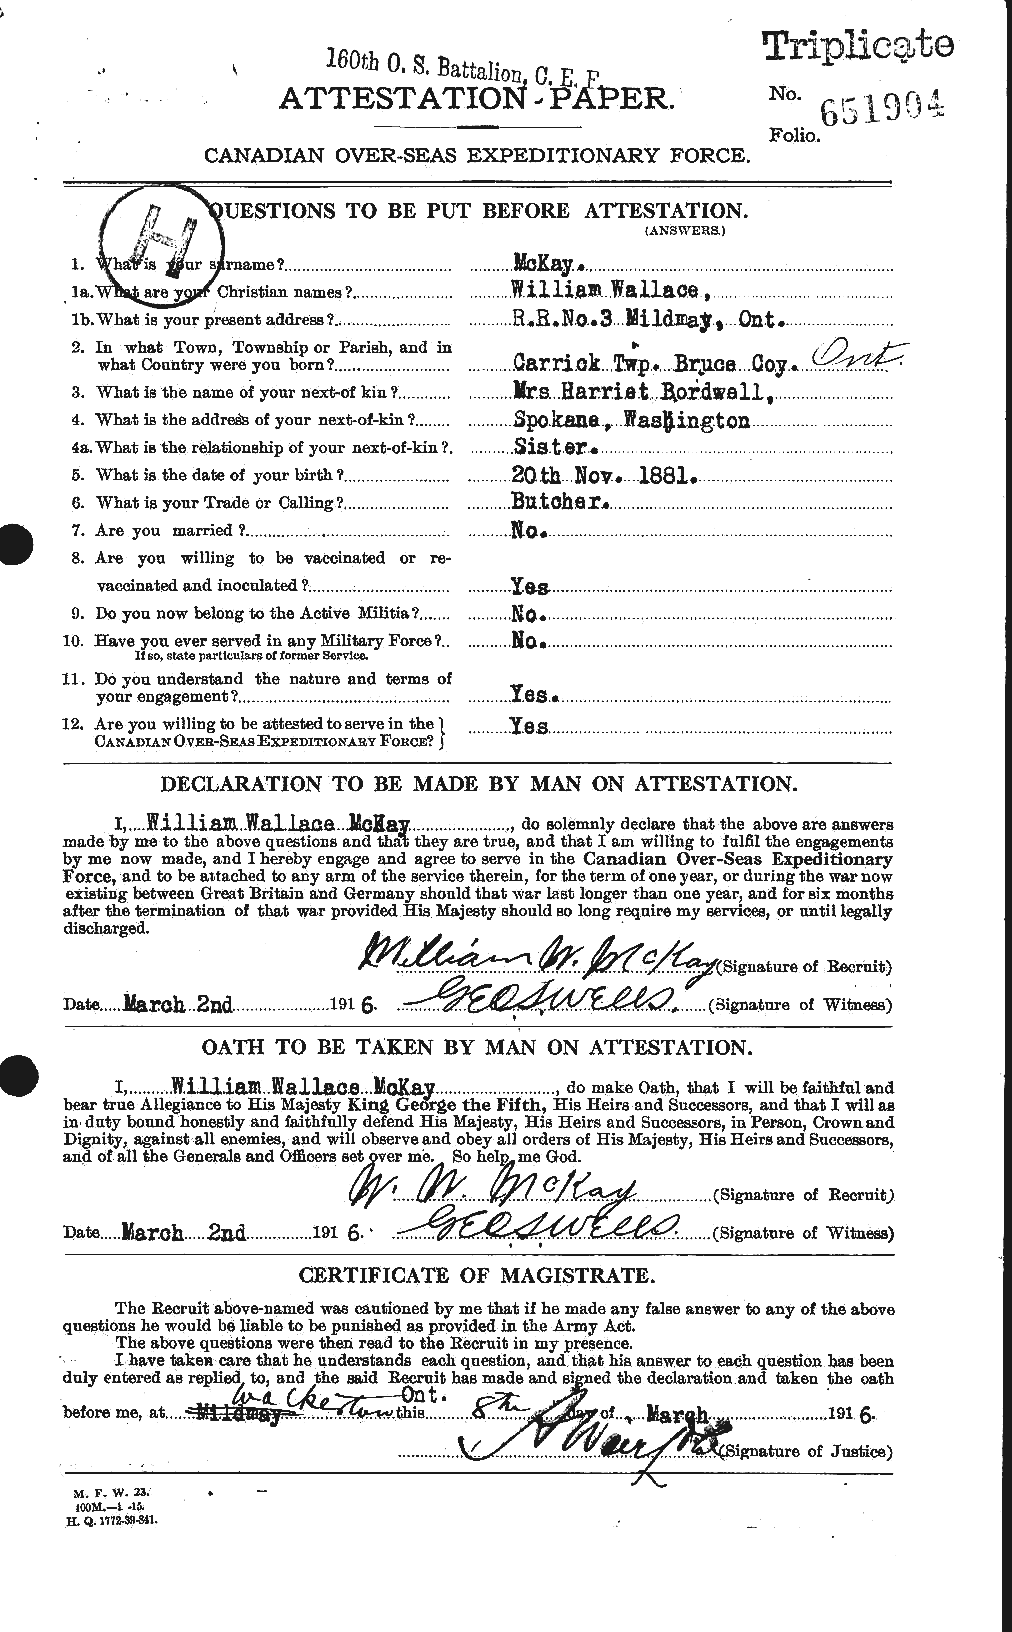 Personnel Records of the First World War - CEF 530324a